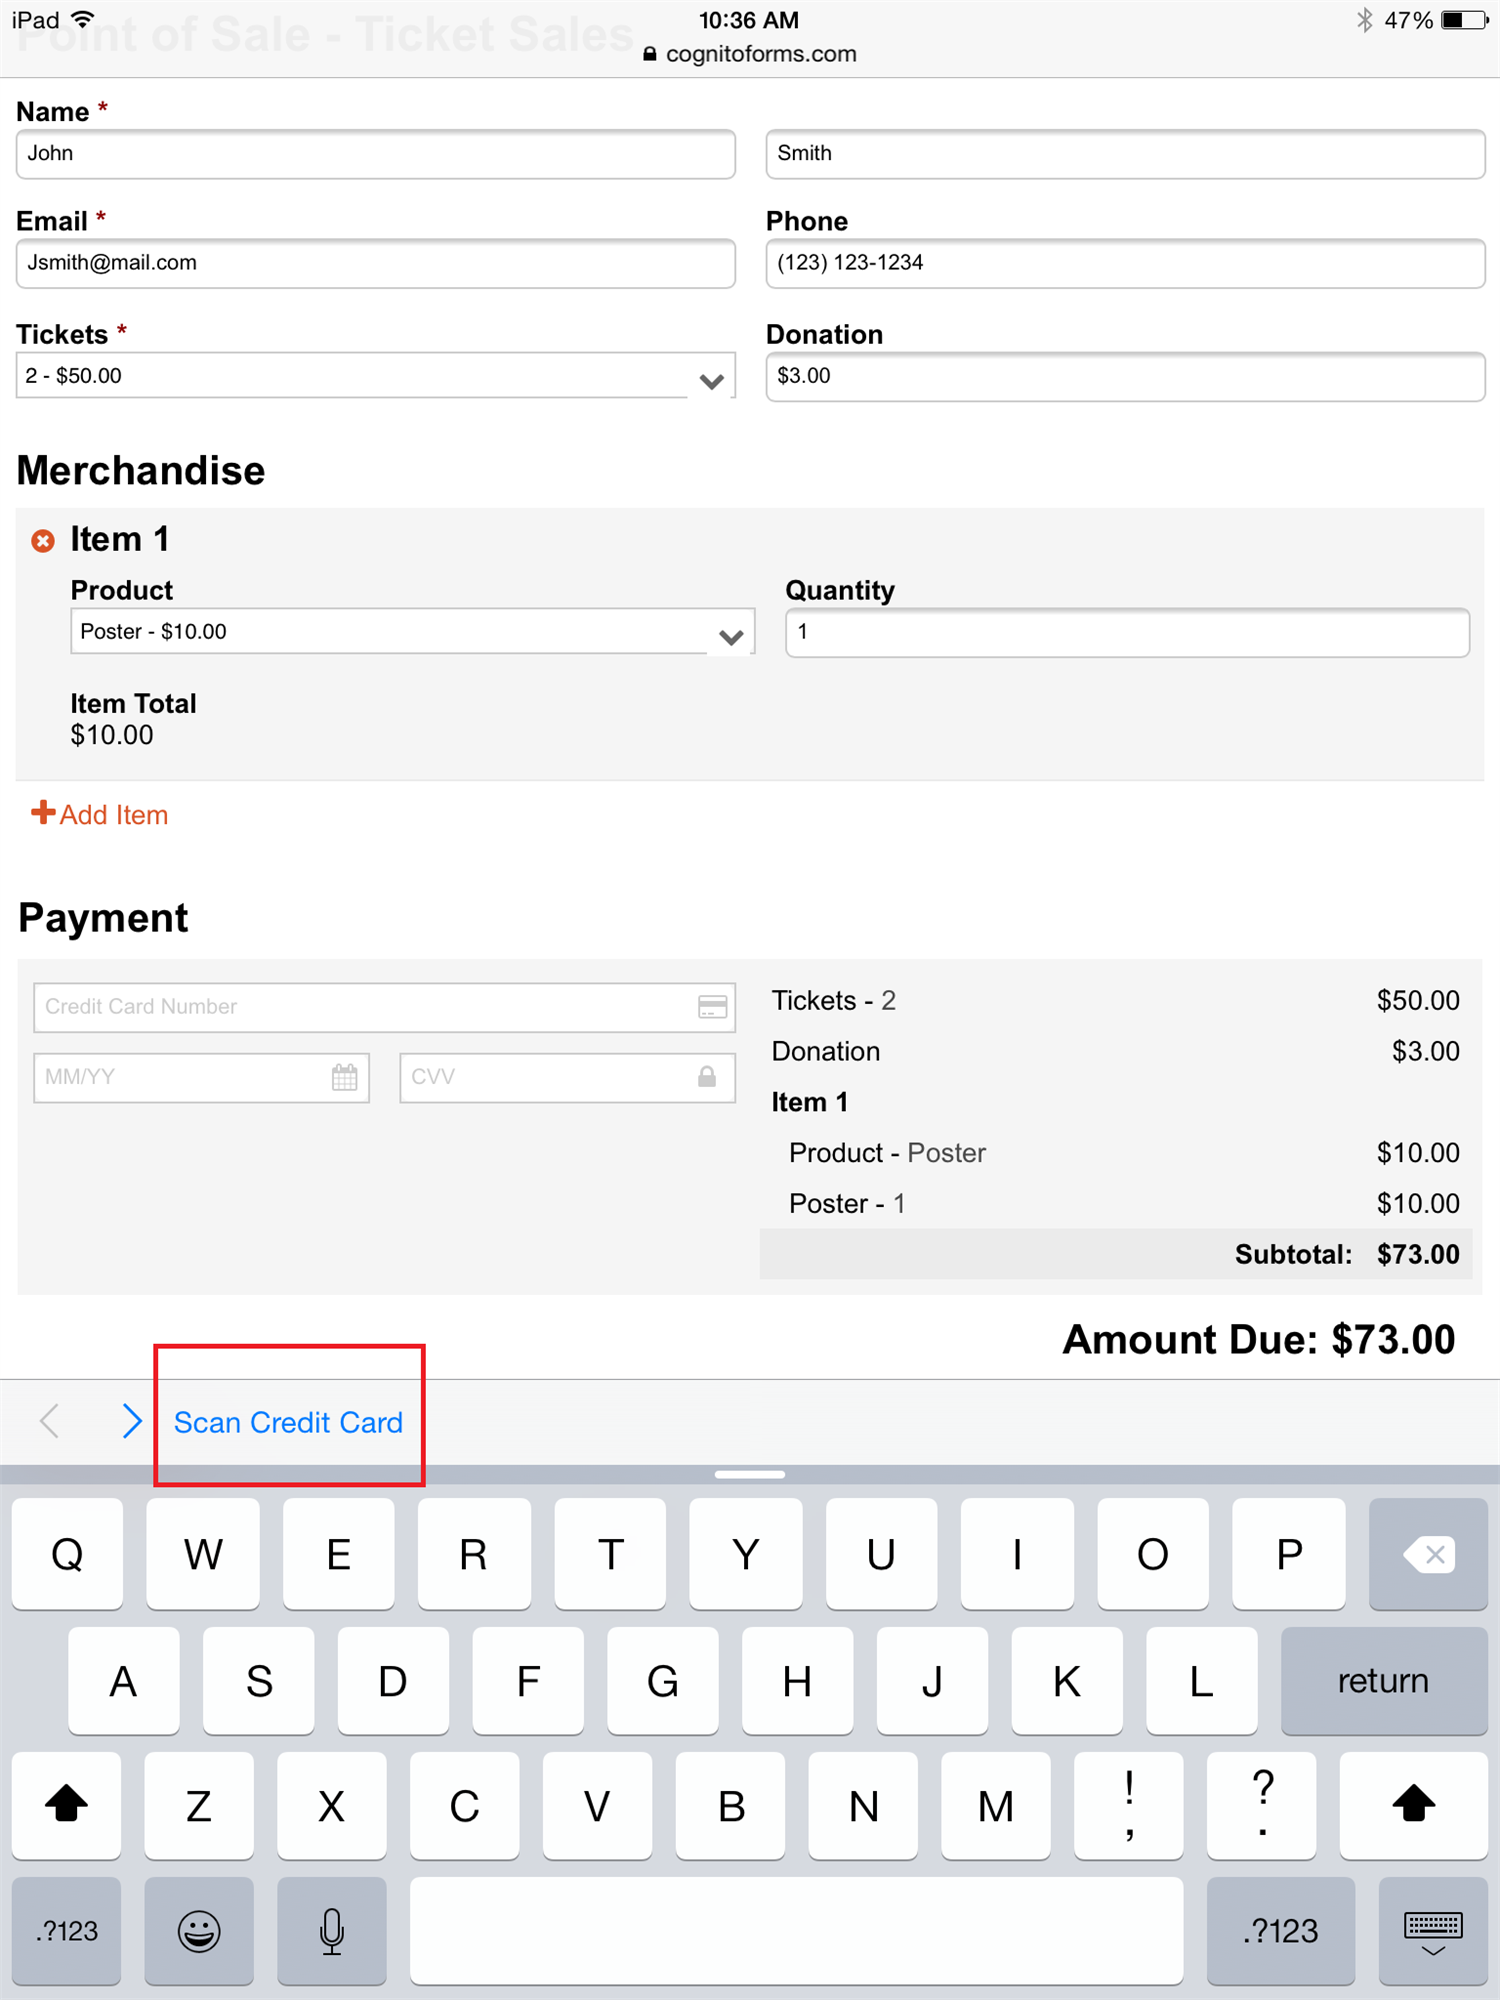 You can scan credit cards directly into your payment form with iOS 9 card scanning abilities.